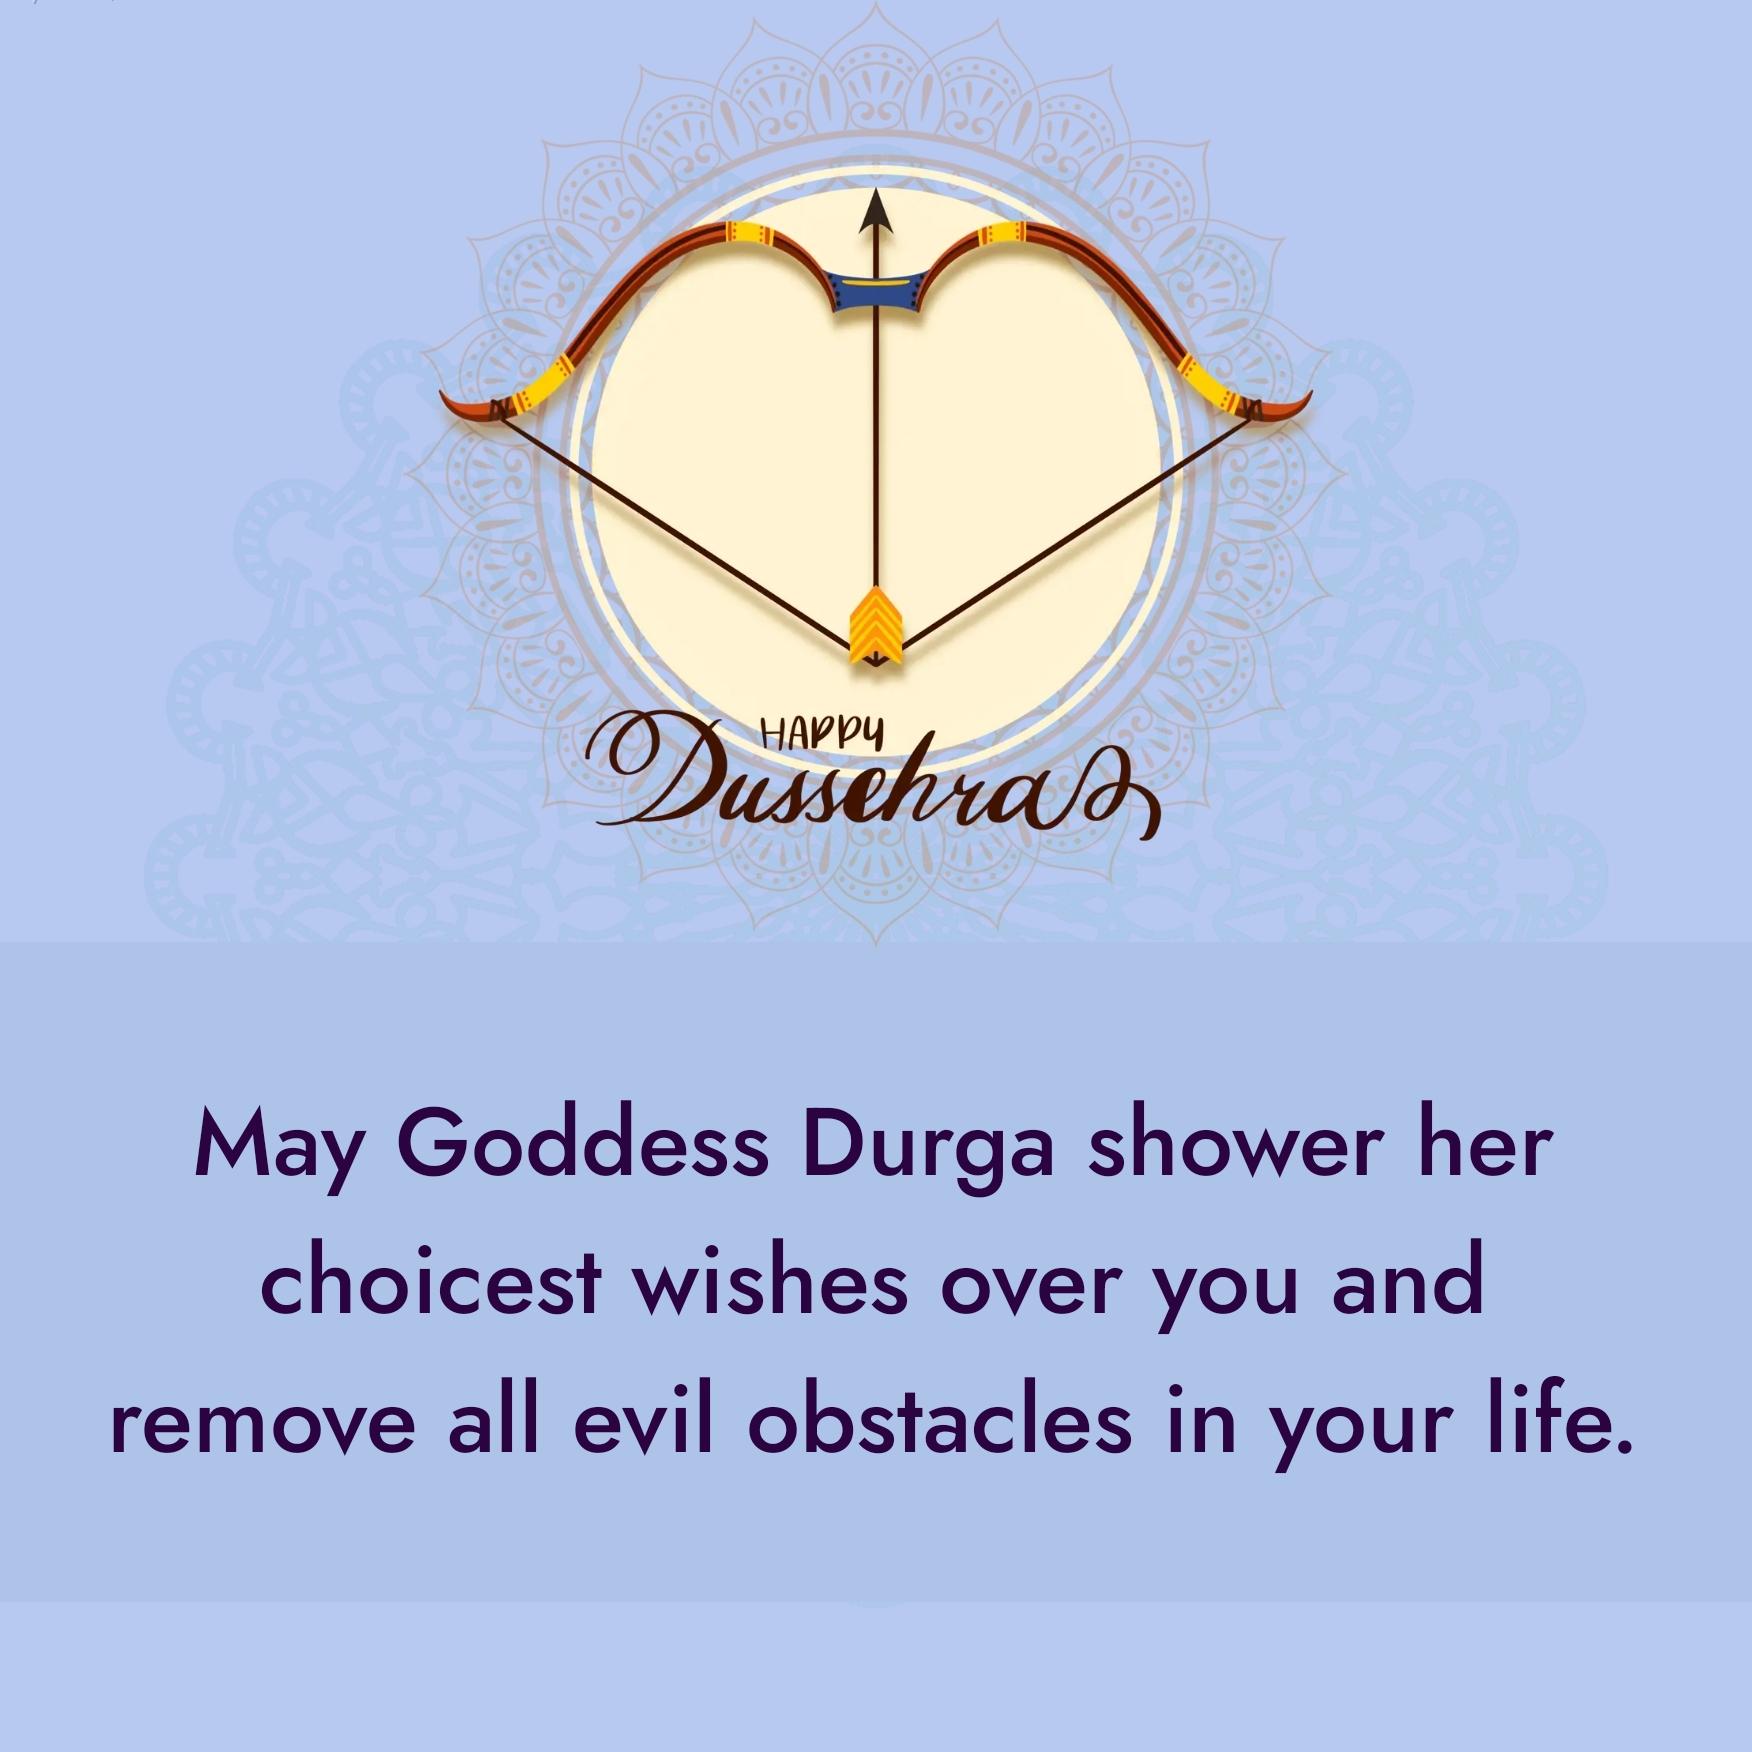 May Goddess Durga shower her choicest wishes